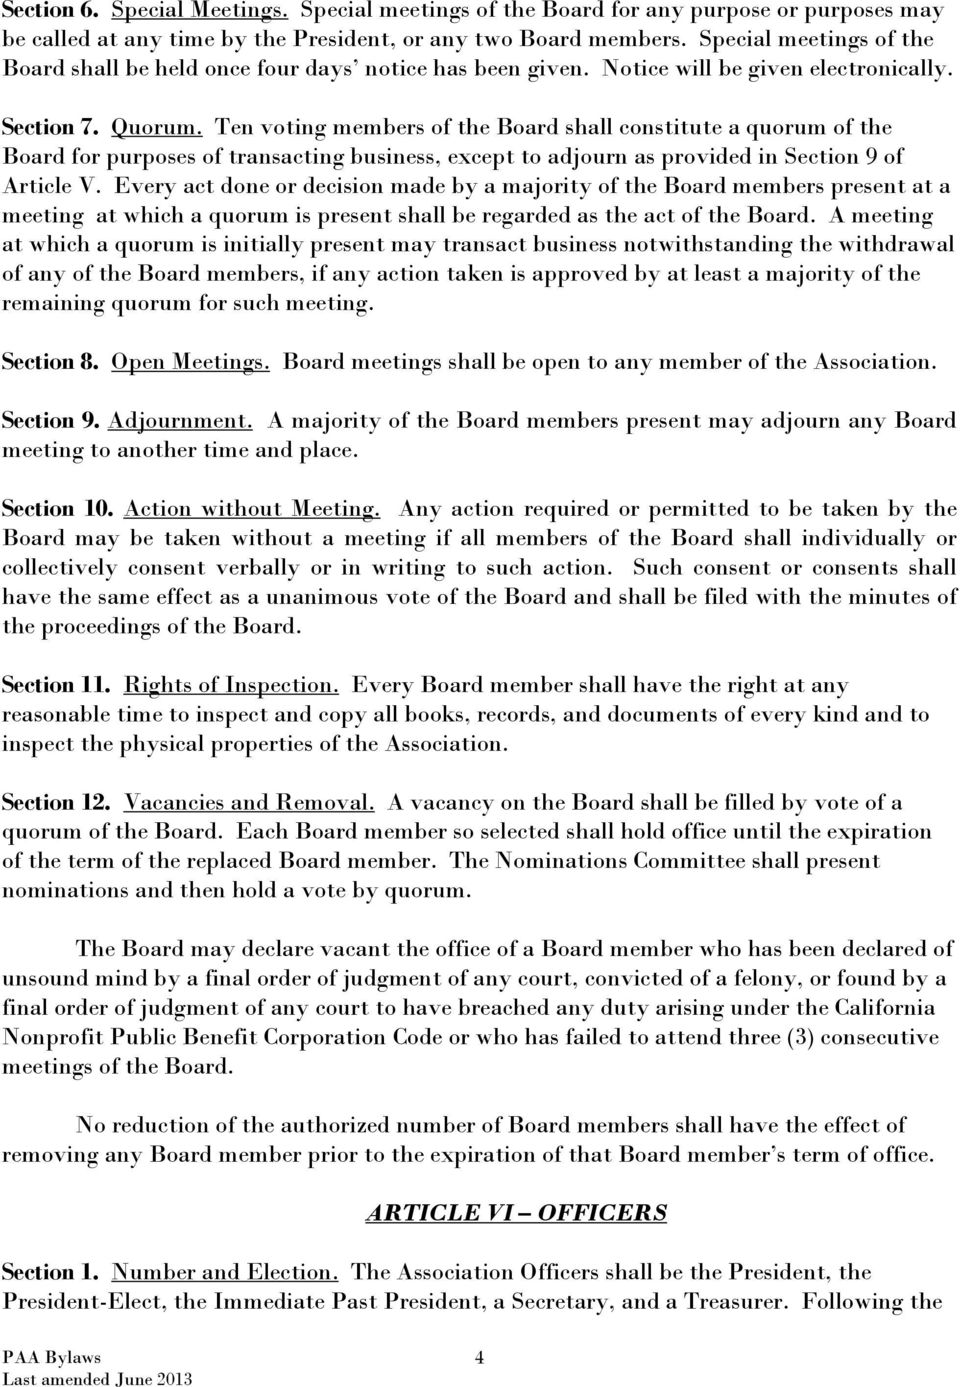 Ten voting members of the Board shall constitute a quorum of the Board for purposes of transacting business, except to adjourn as provided in Section 9 of Article V.